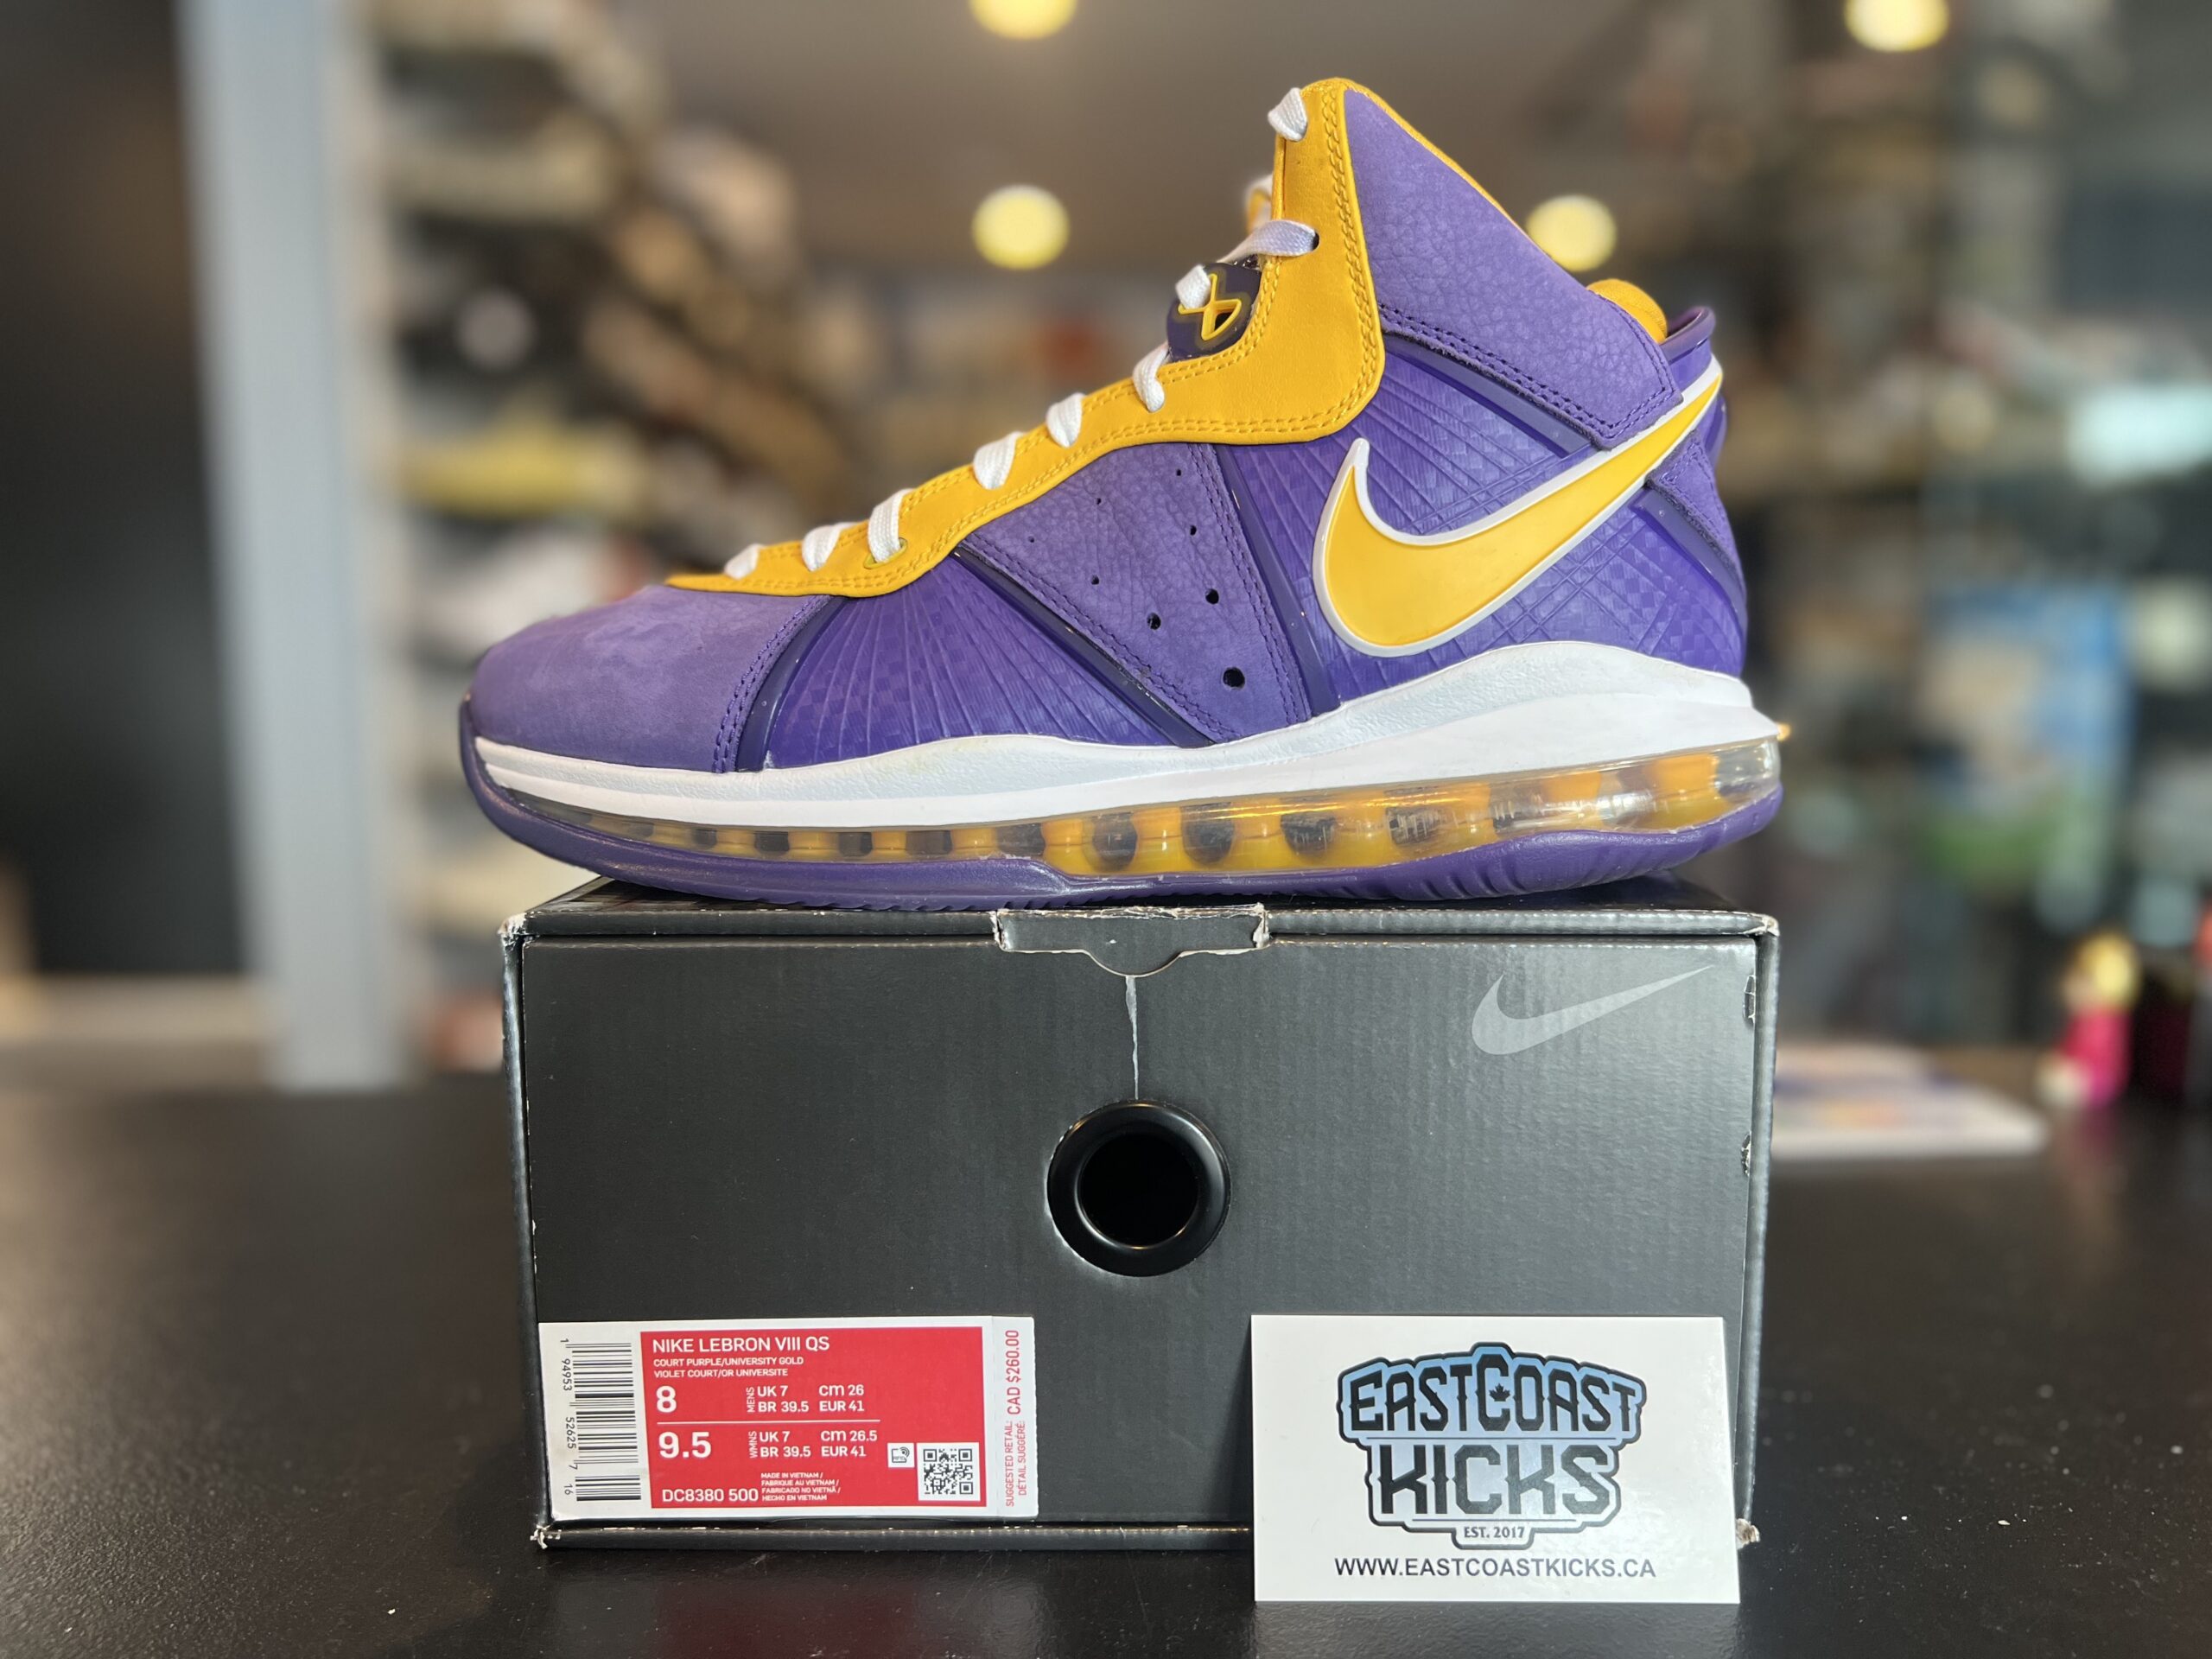 Preowned Nike LeBron 8 Lakers Size 8